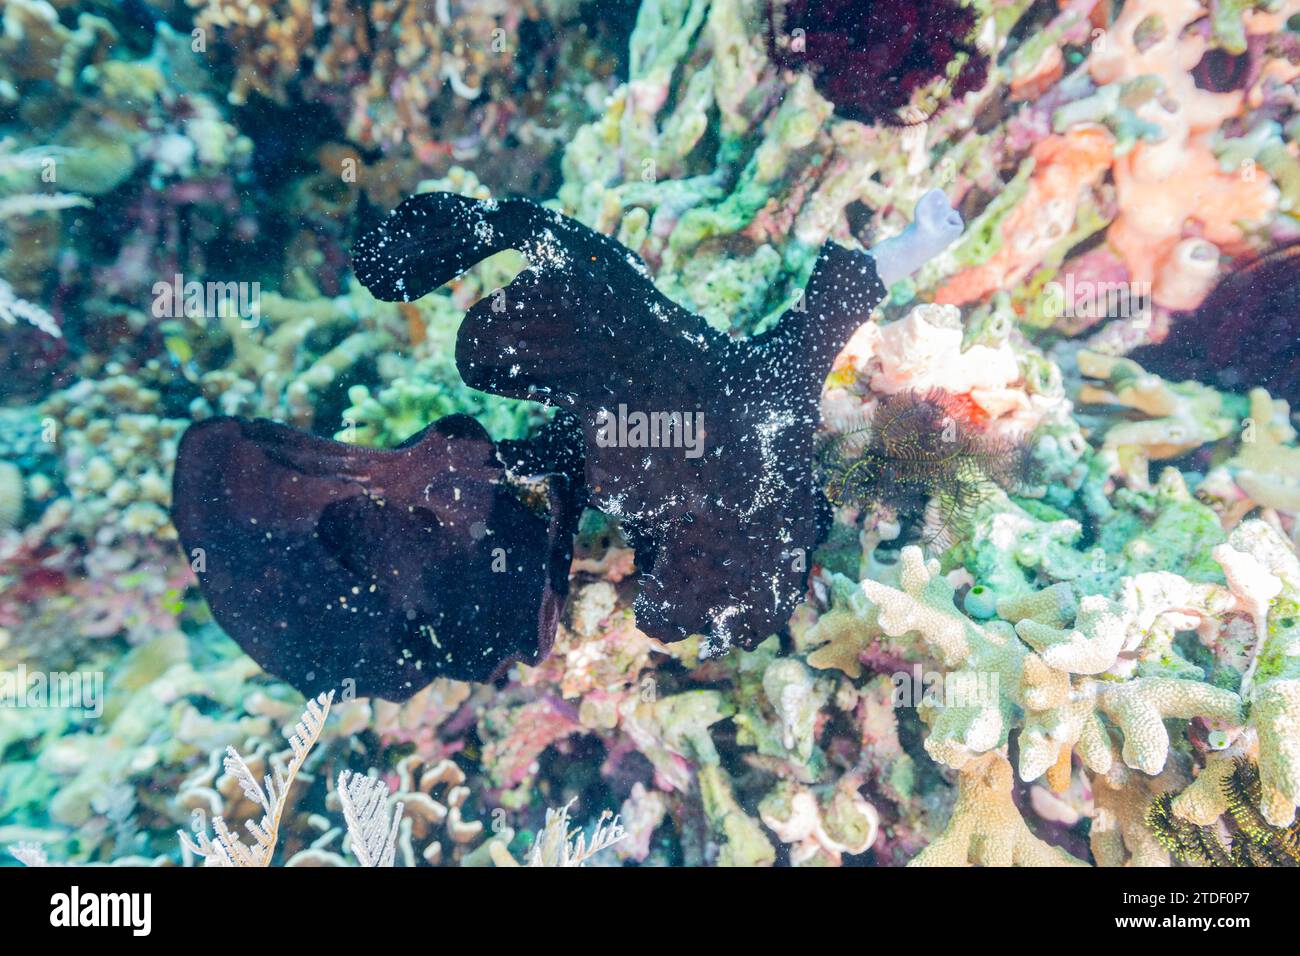 An adult painted frogfish (Antennarius pictus) camouflaged in black on the reef off Bangka Island, Indonesia, Southeast Asia Stock Photo